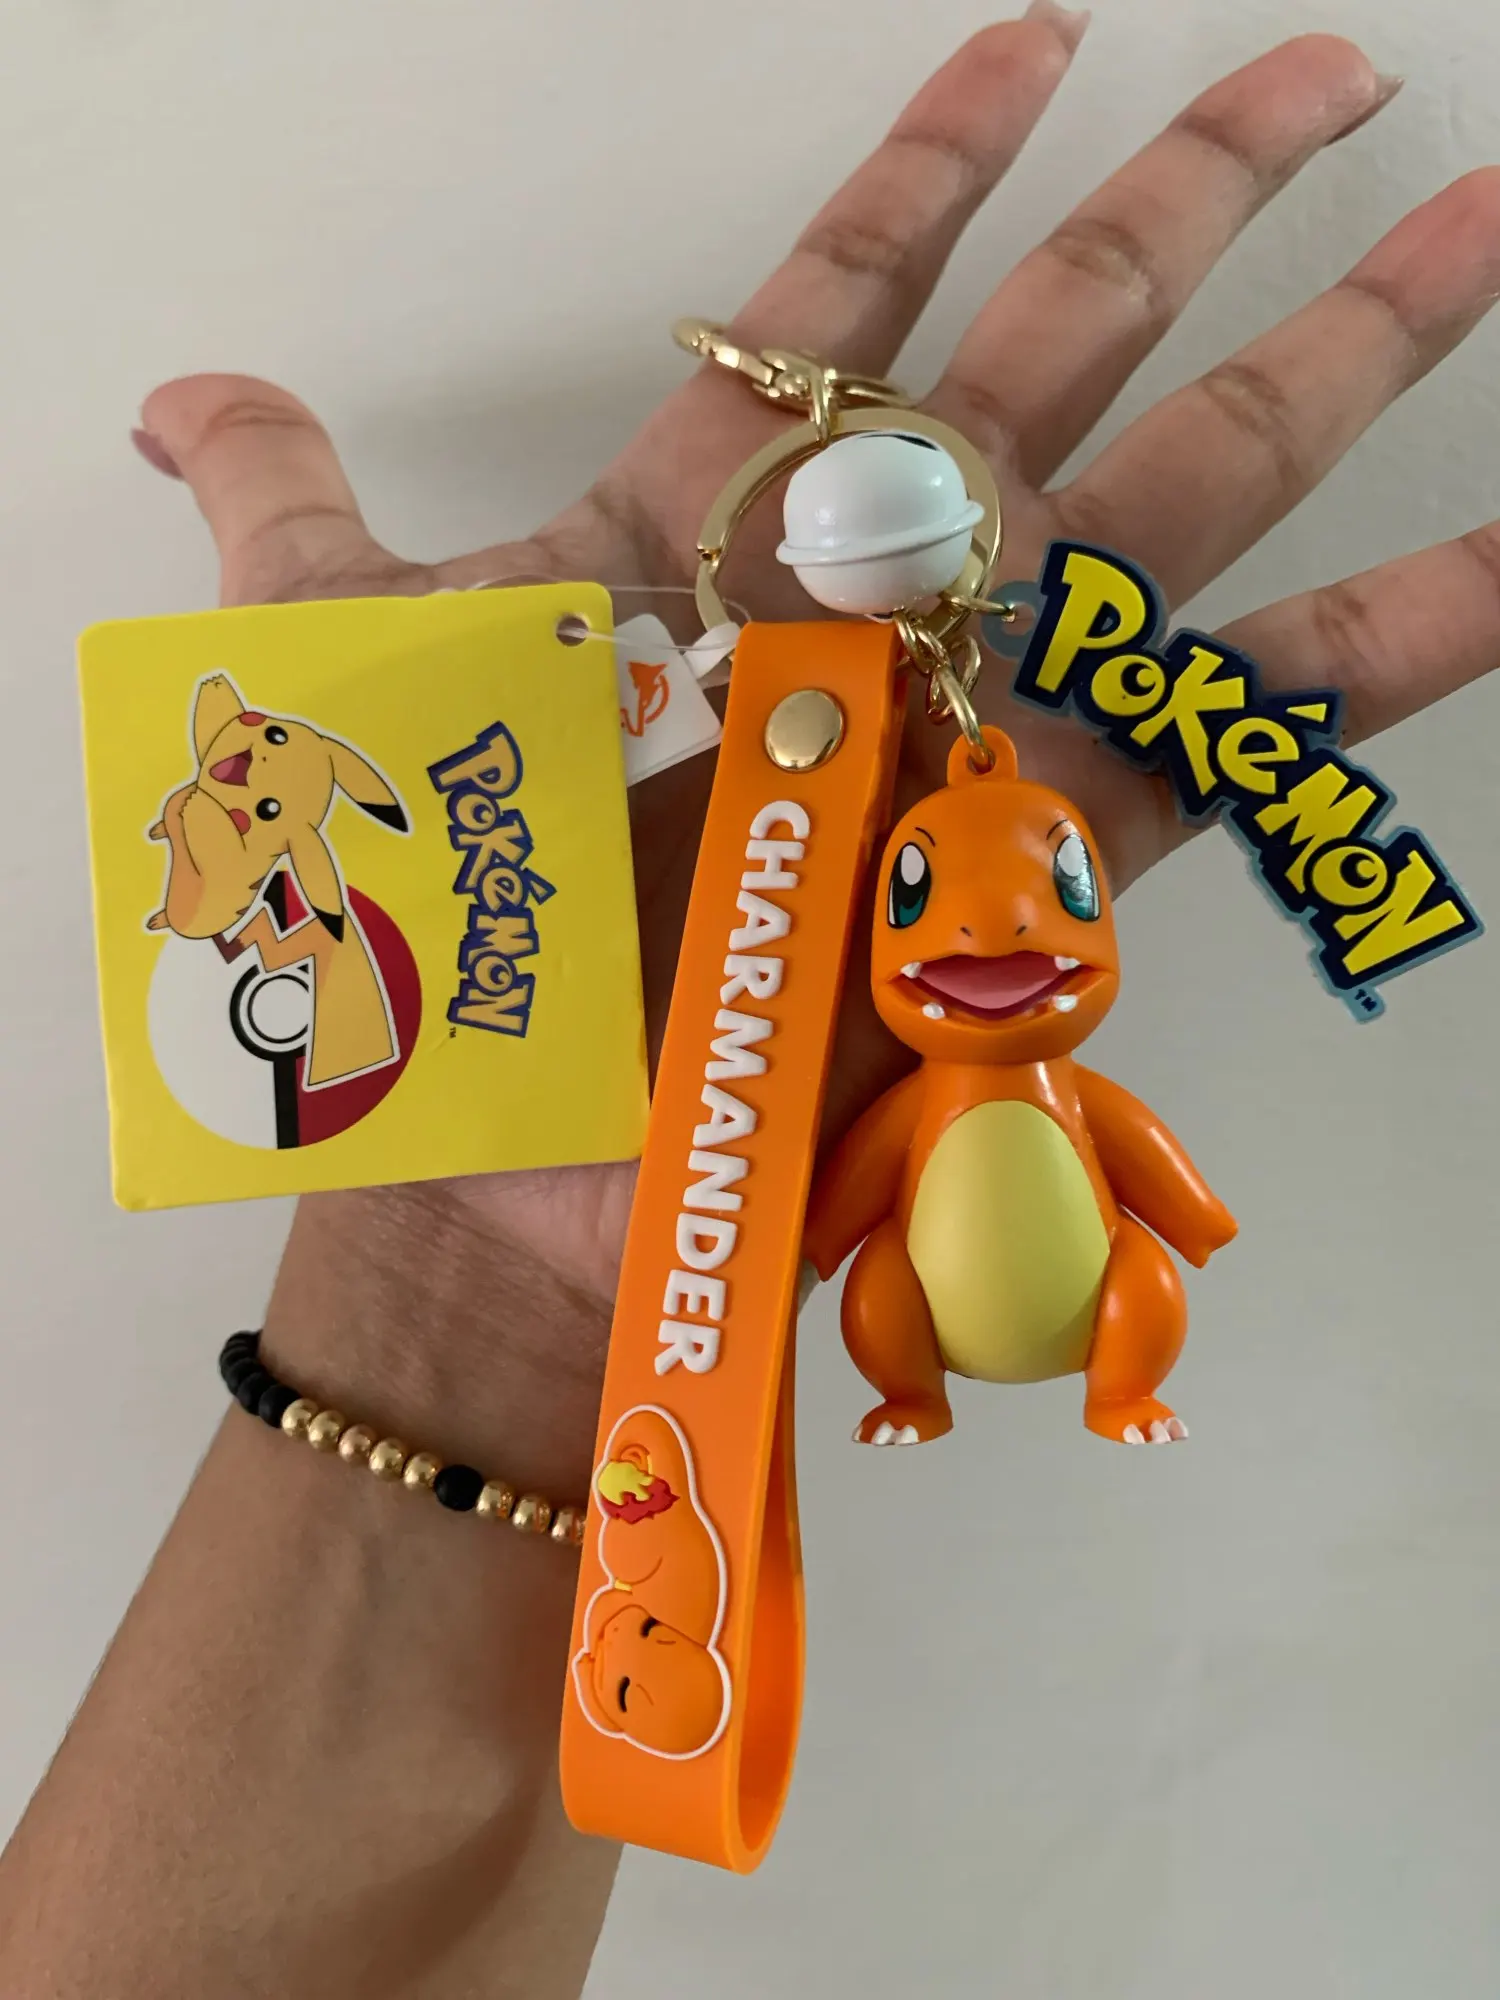 Authentic Pokemon Action Figure Pikachu Keychain Pokémon Keychain Squirtle Psyduck Keychain Backpack Pendant Model Car Keychains photo review